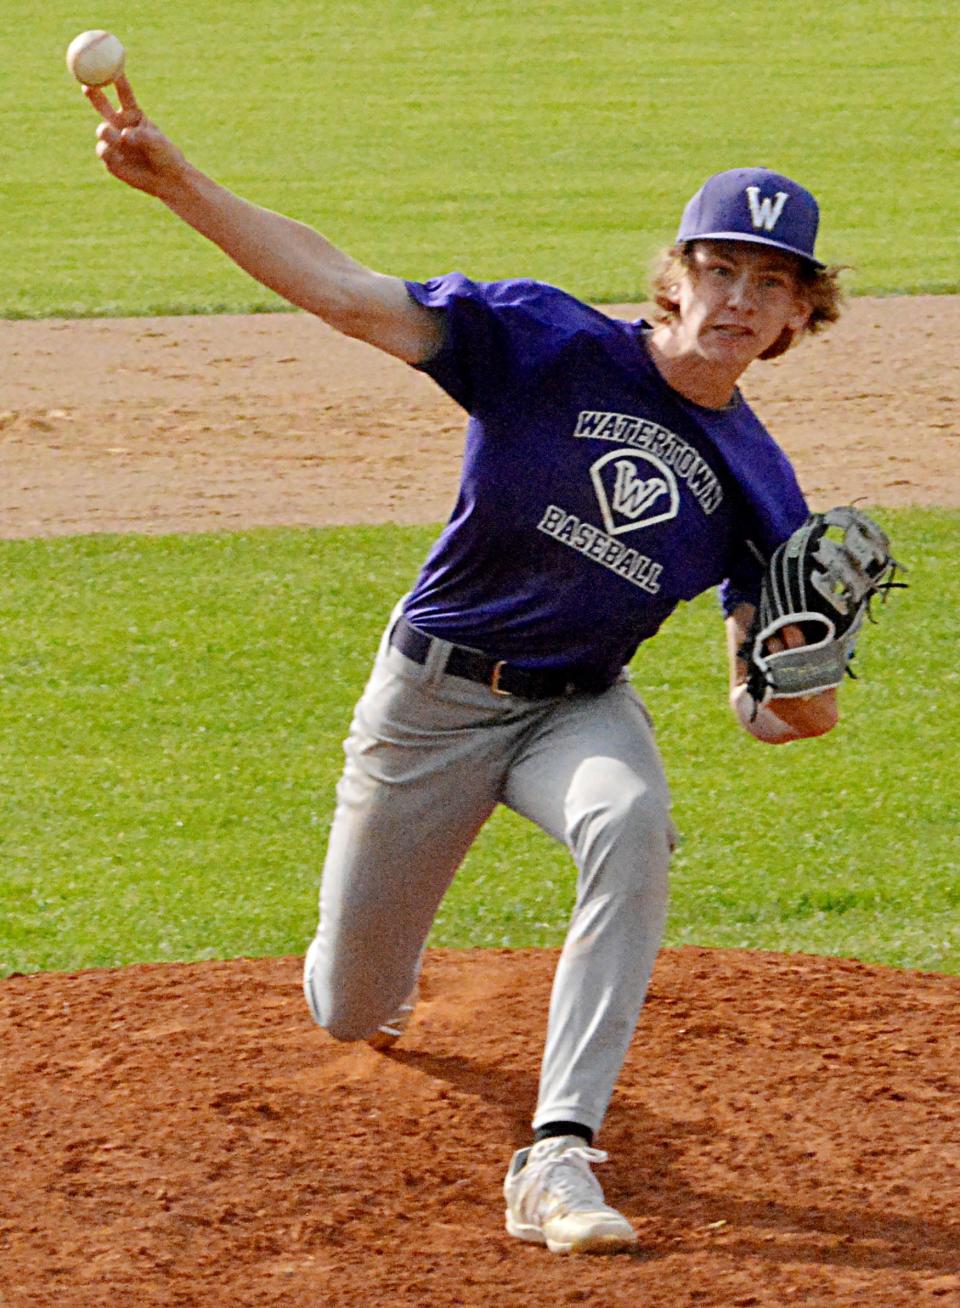 Ashton Rabine and the Watertown Black Sox are among 14 teams slated to play this weekend in the Class A Baseball 14-and-under state tournament at Pierre.